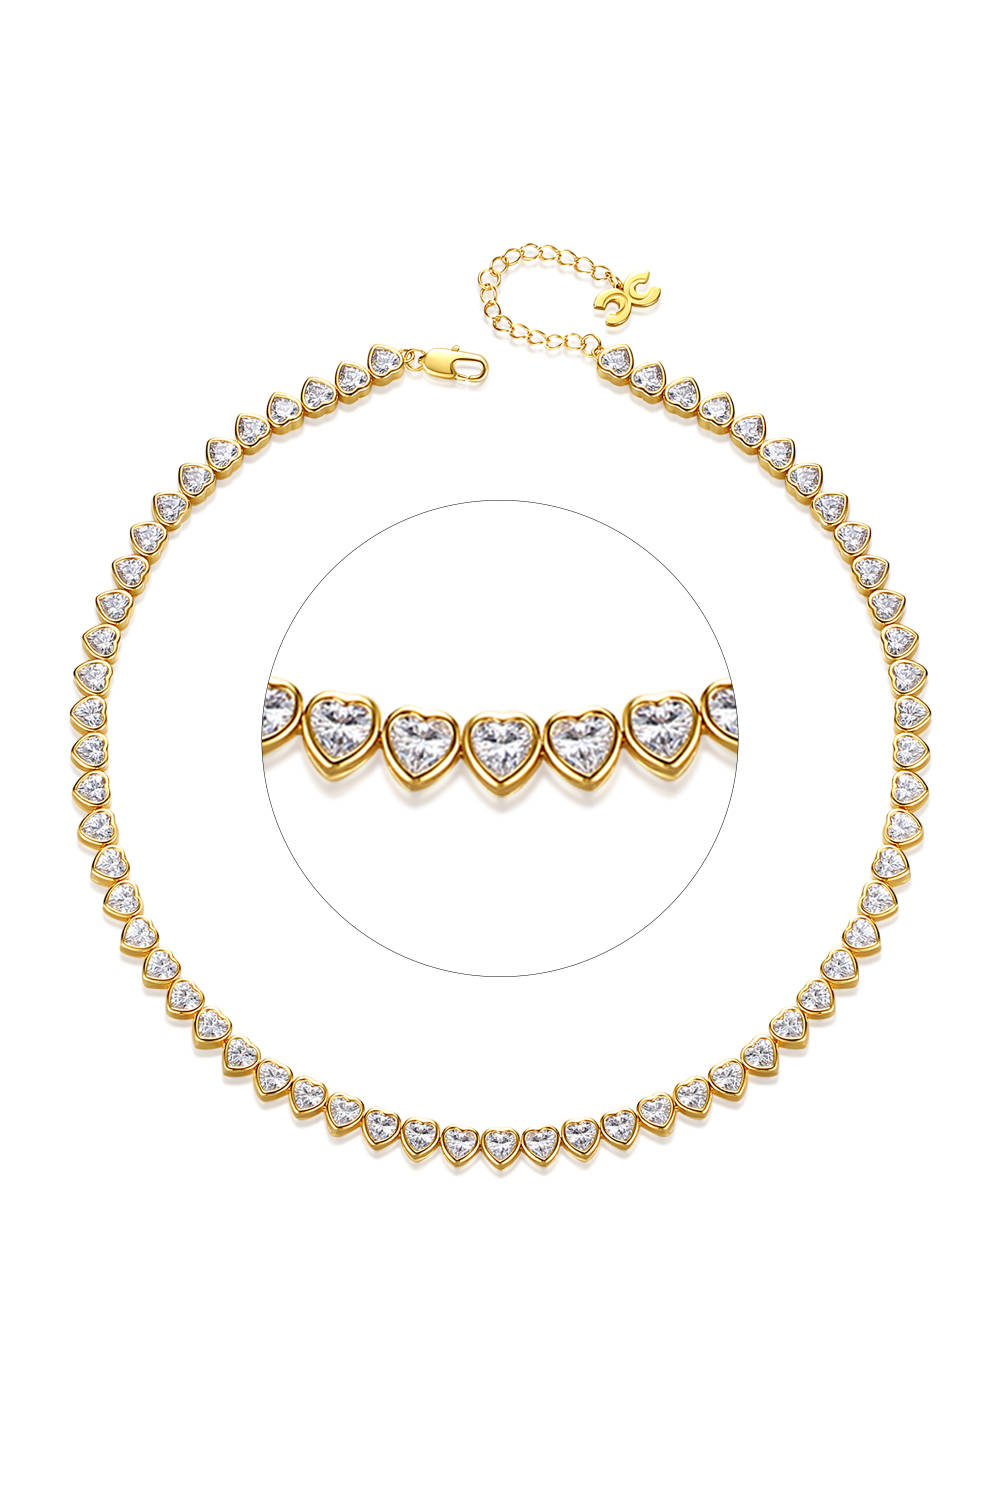 Classicharms-Gold Sparkling Heart Shaped Zirconia Tennis Necklace